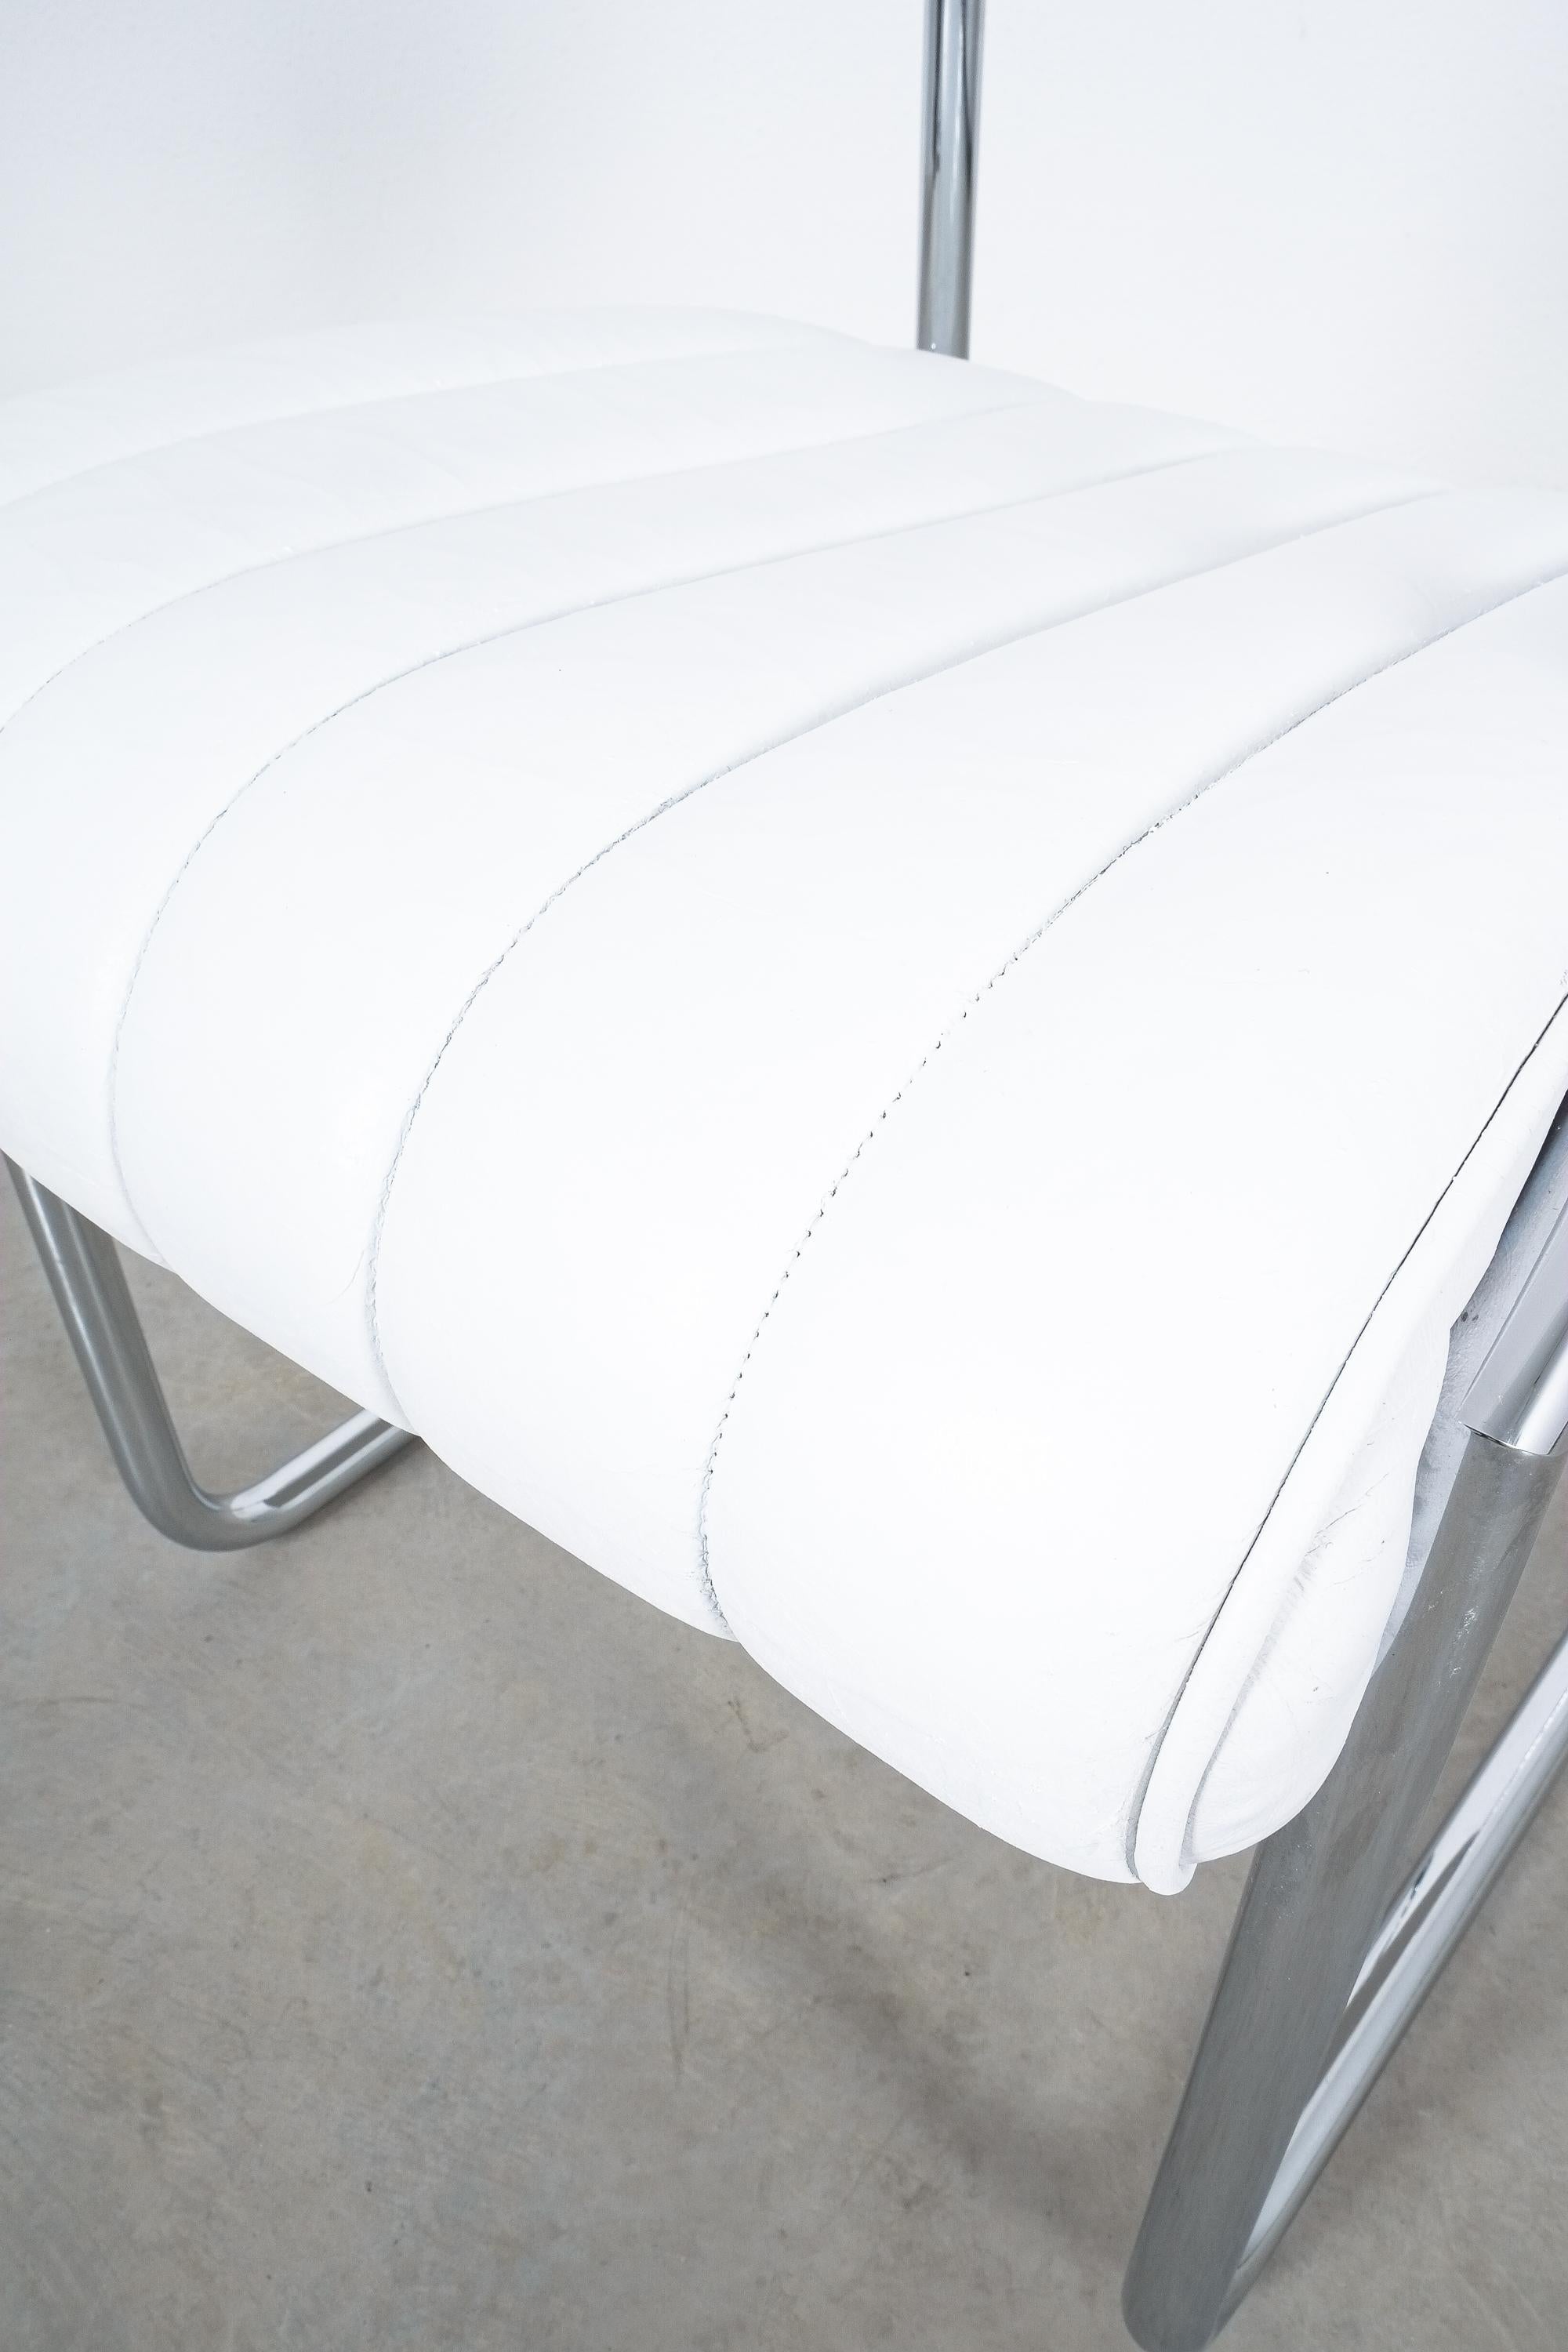 Late 20th Century Non Conformist Chair by Eileen Gray, Designed 1926, Chrome White Leather